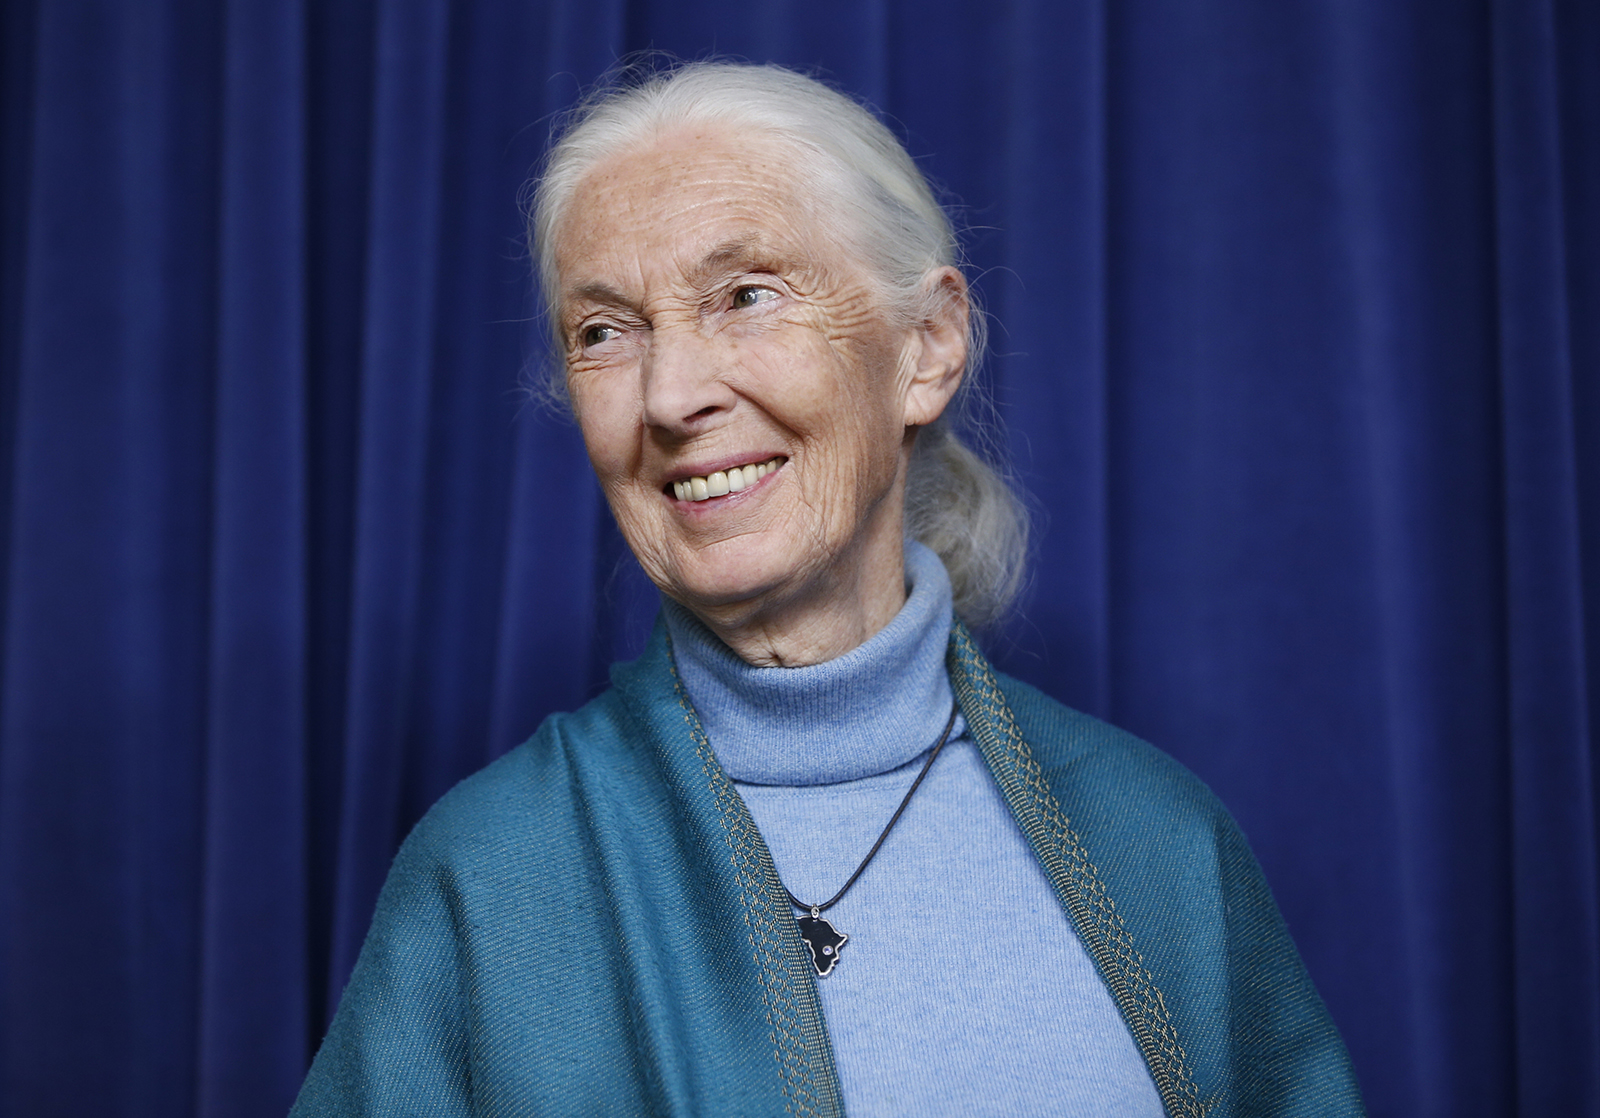 This April 3, 2019, file photo shows primatologist Jane Goodall being honored for her lifetime achievements at a ceremony on her 85th birthday in Los Angeles. (AP Photo/Damian Dovarganes, File)